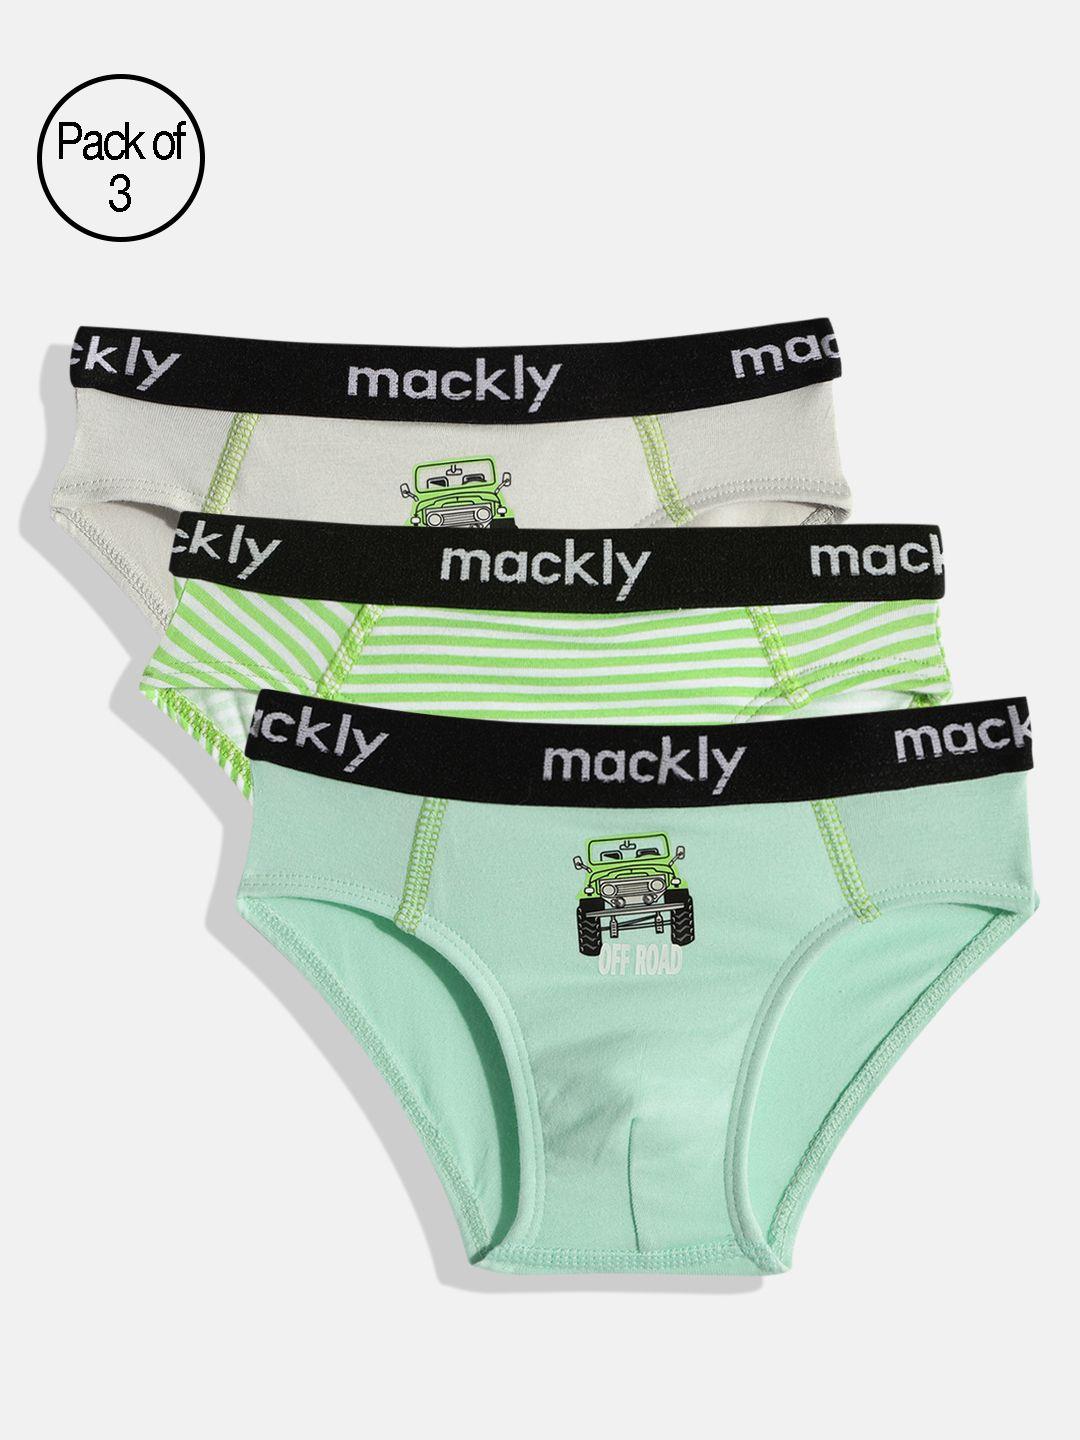 mackly boys pack of 3 pure cotton basic briefs mb-53-2-4 yrs